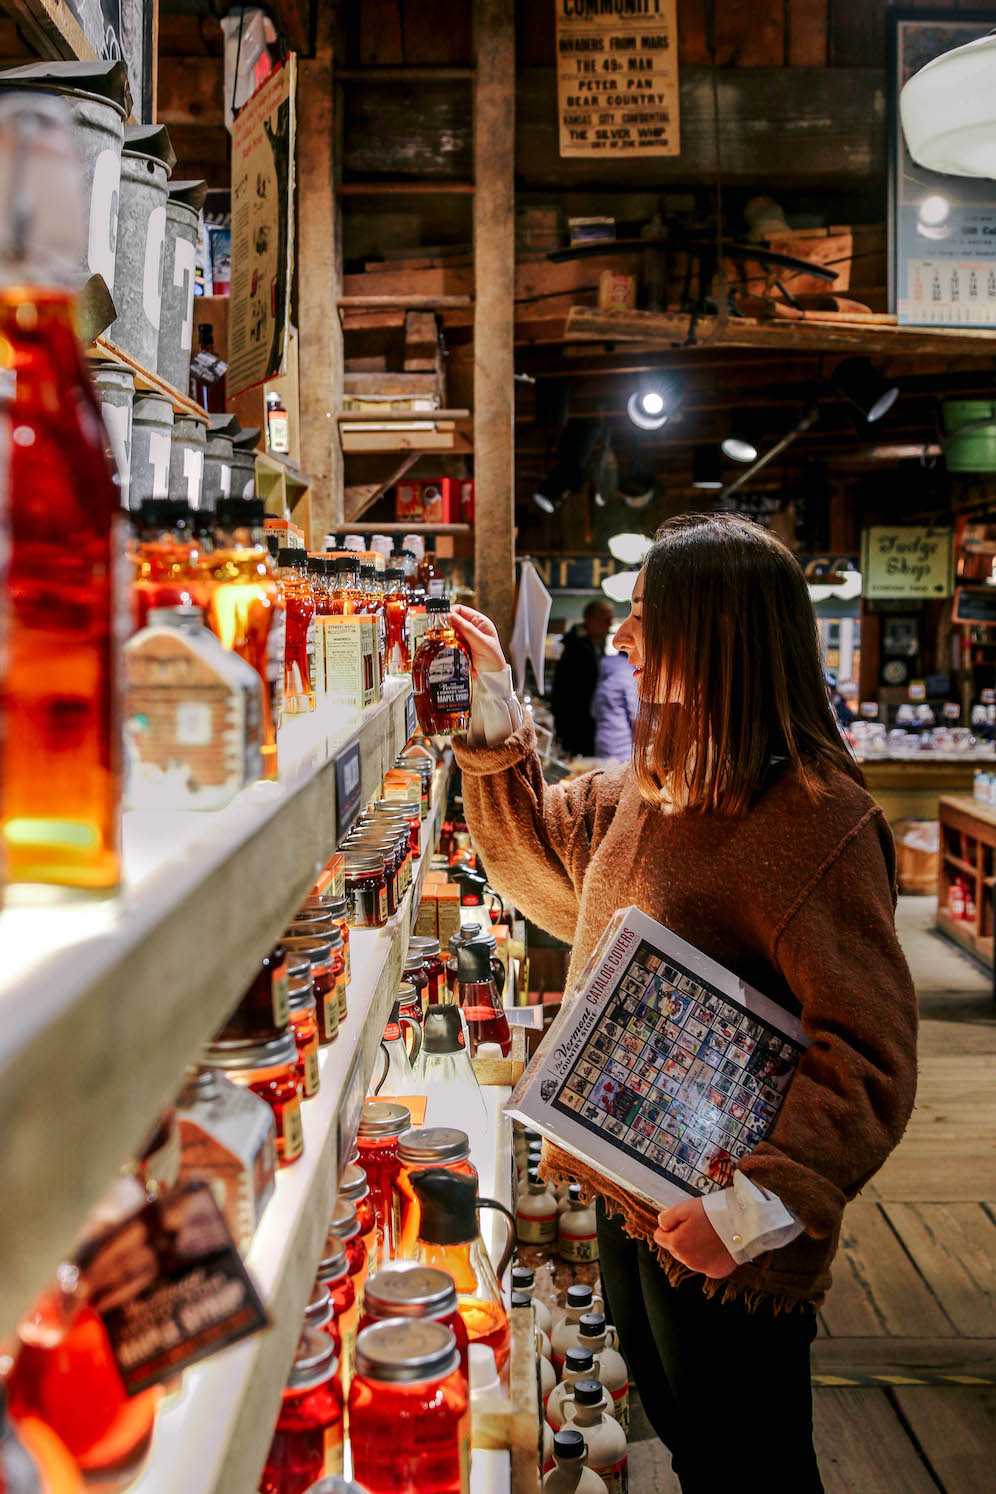 The Vermont Country Store  Things to do on VisitorTips